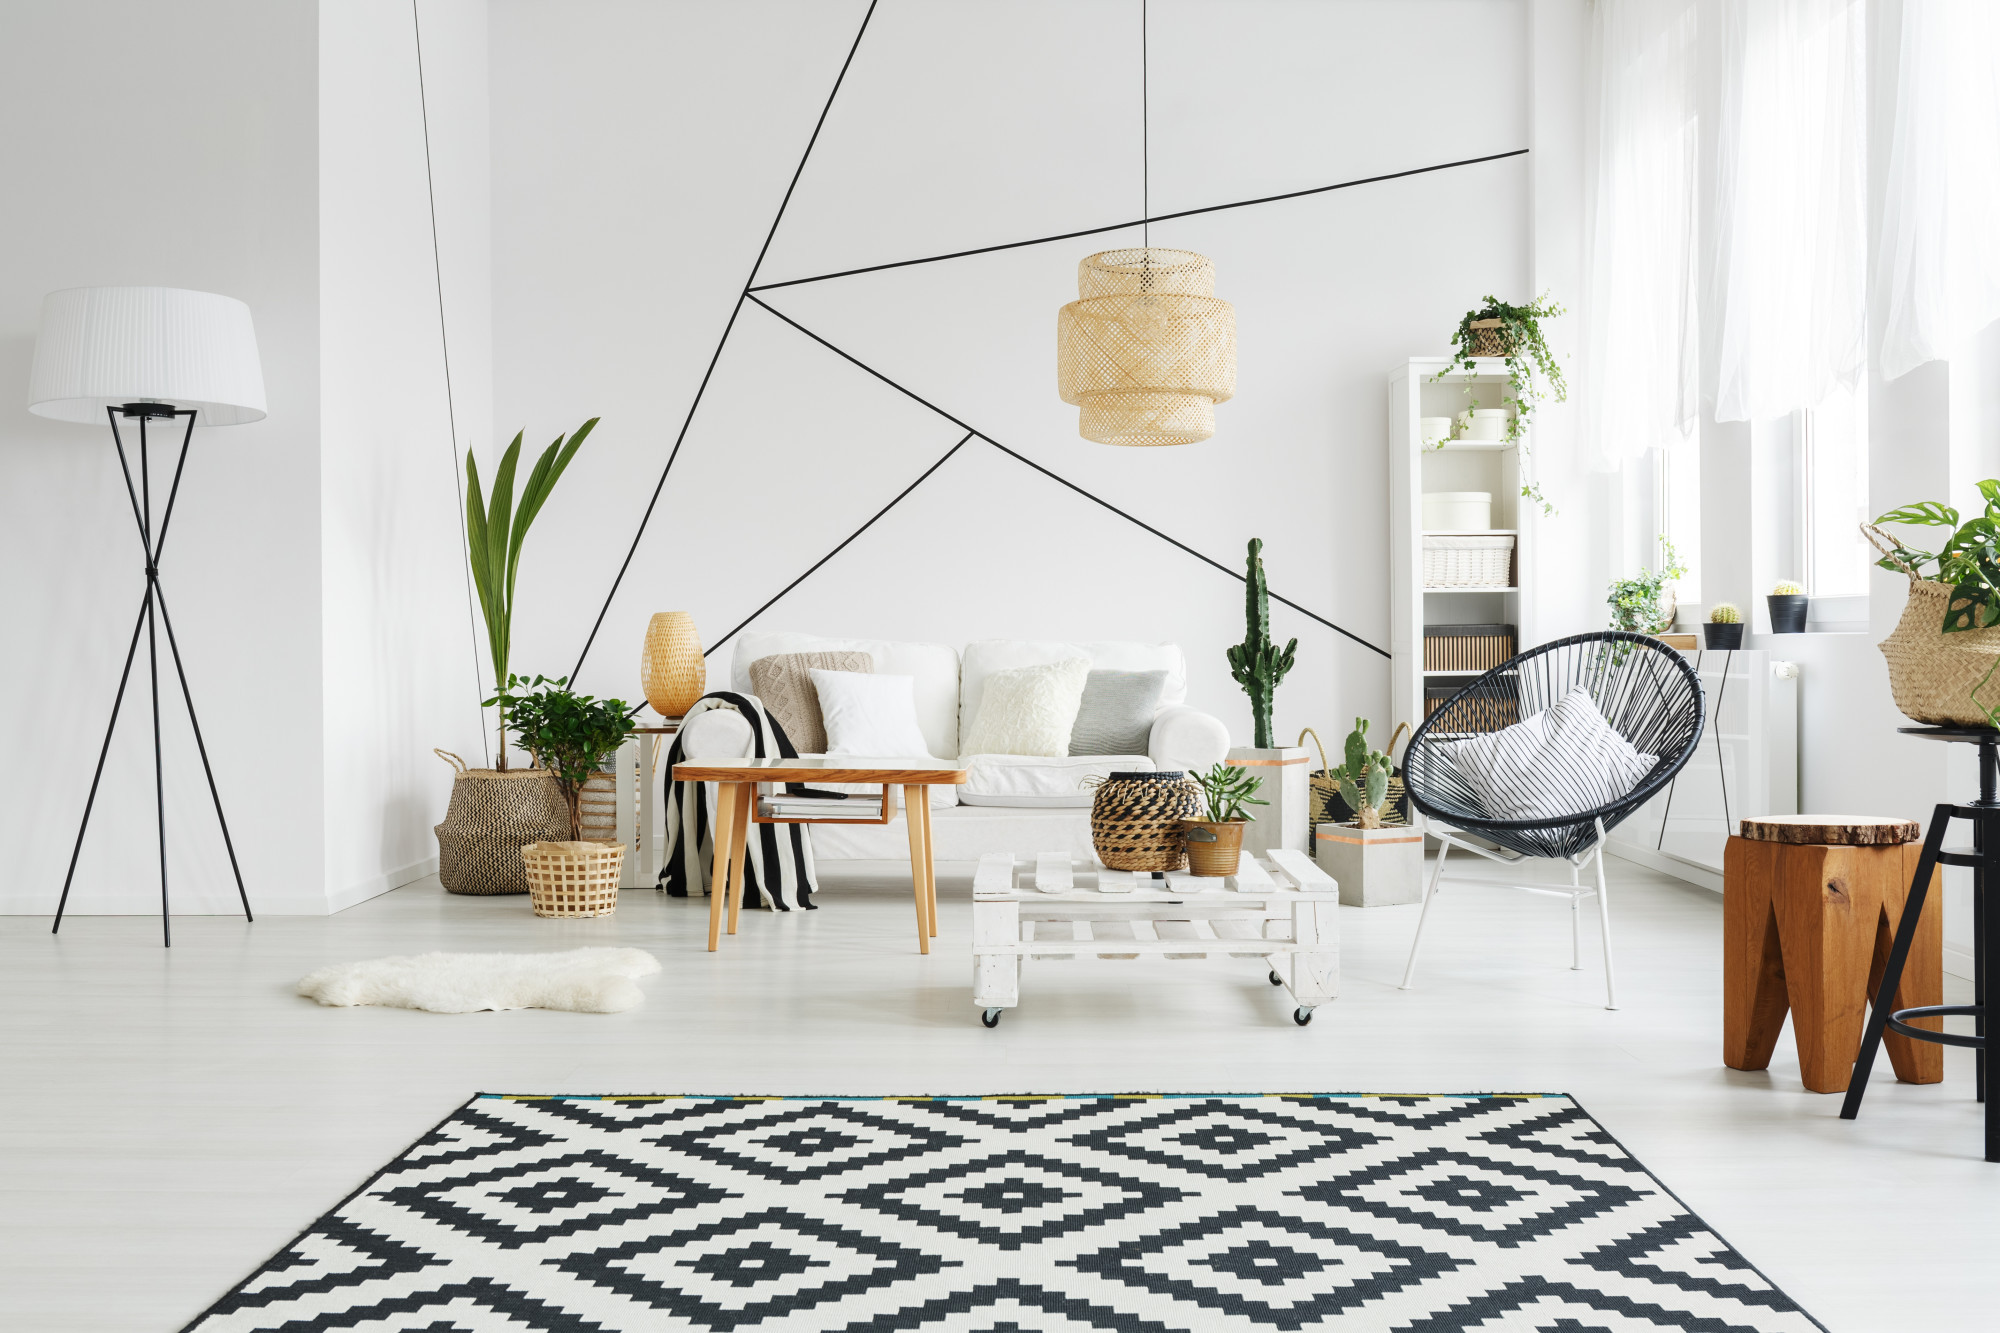 functional, warm and simple: scandinavian decoration style